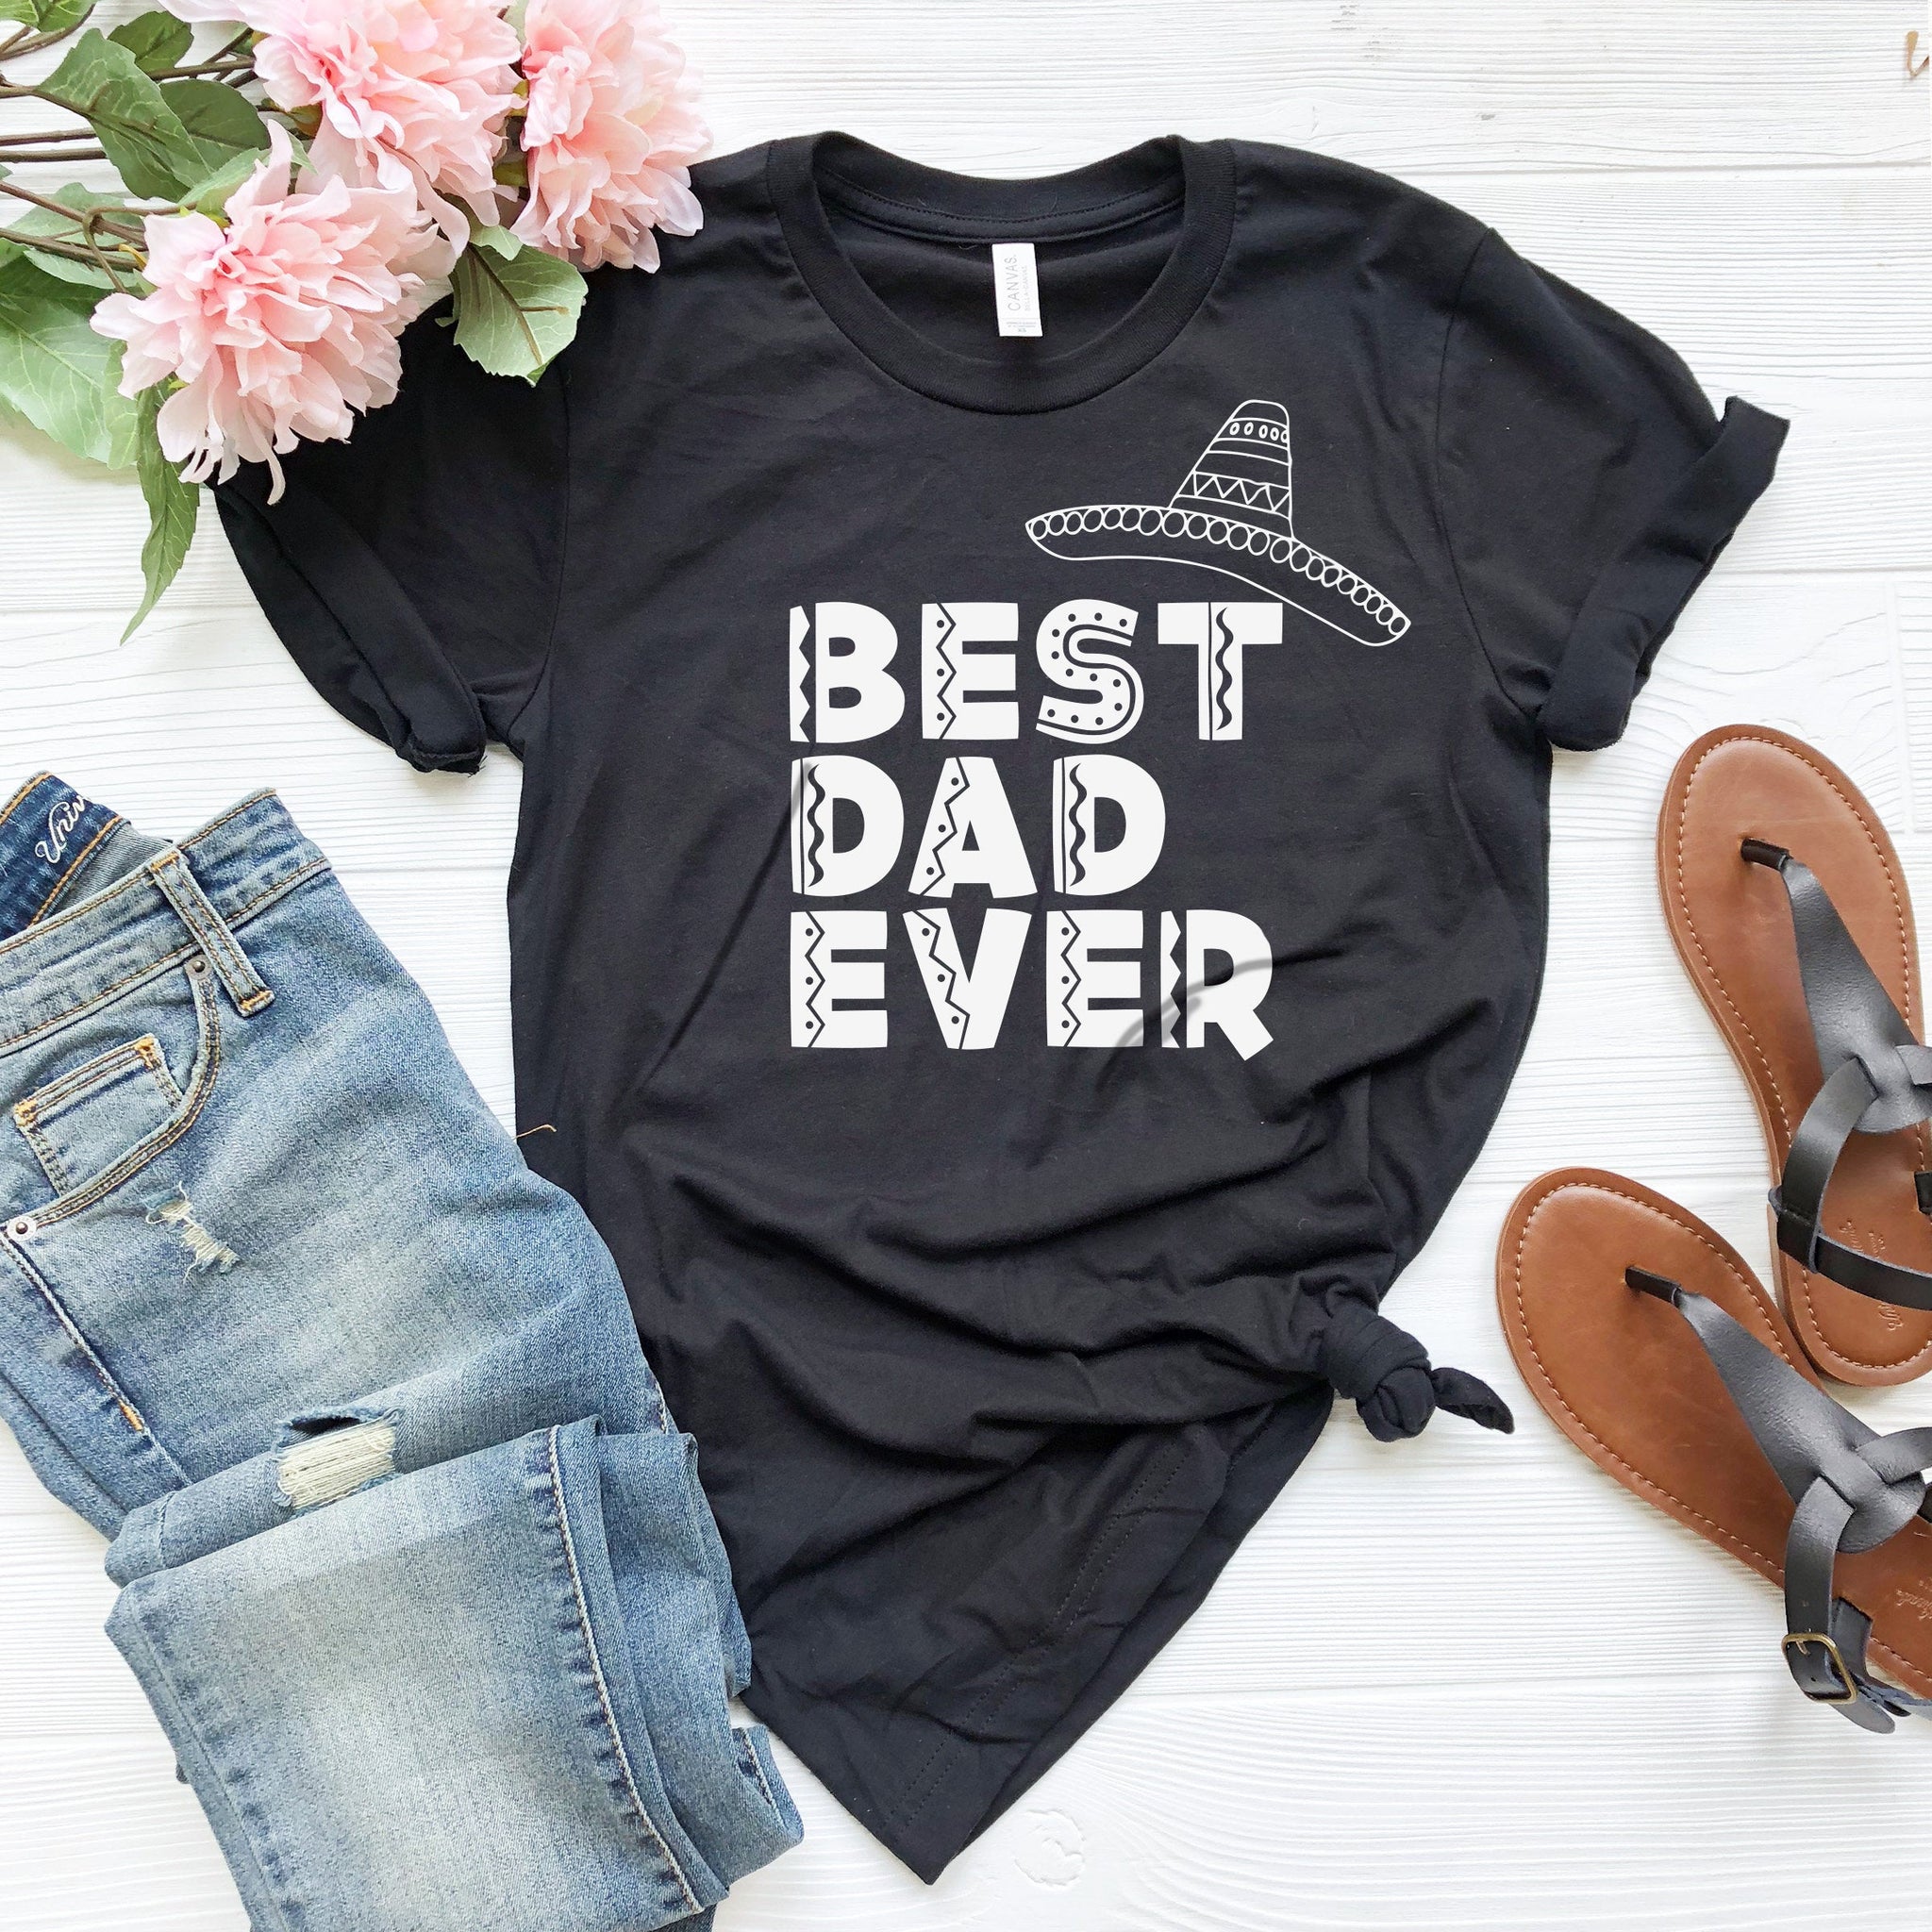 Funny Dad Tshirts for Fathers Day, Dad gift shirts, Dad shirts from daughter, Funny Shirts for dad men husband,Dad Birthday,Best Dad Ever - Fastdeliverytees.com